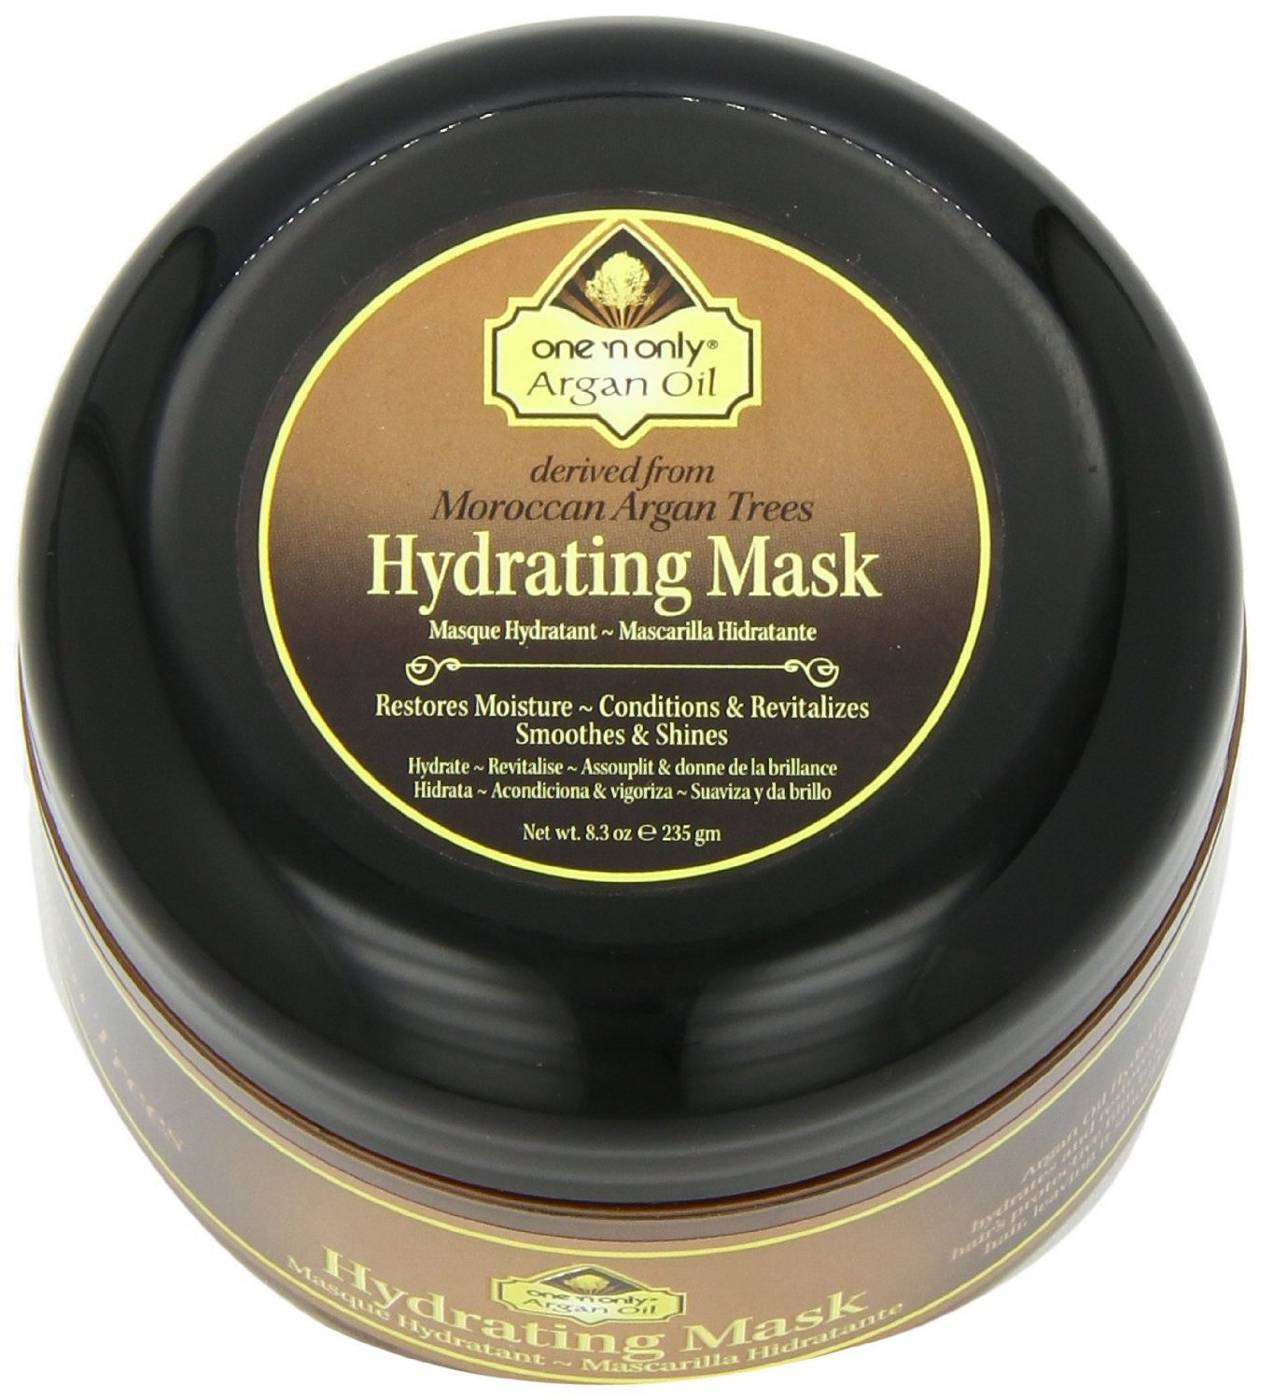 One 'n Only Argan Oil Hydrating Mask; image 2 of 2